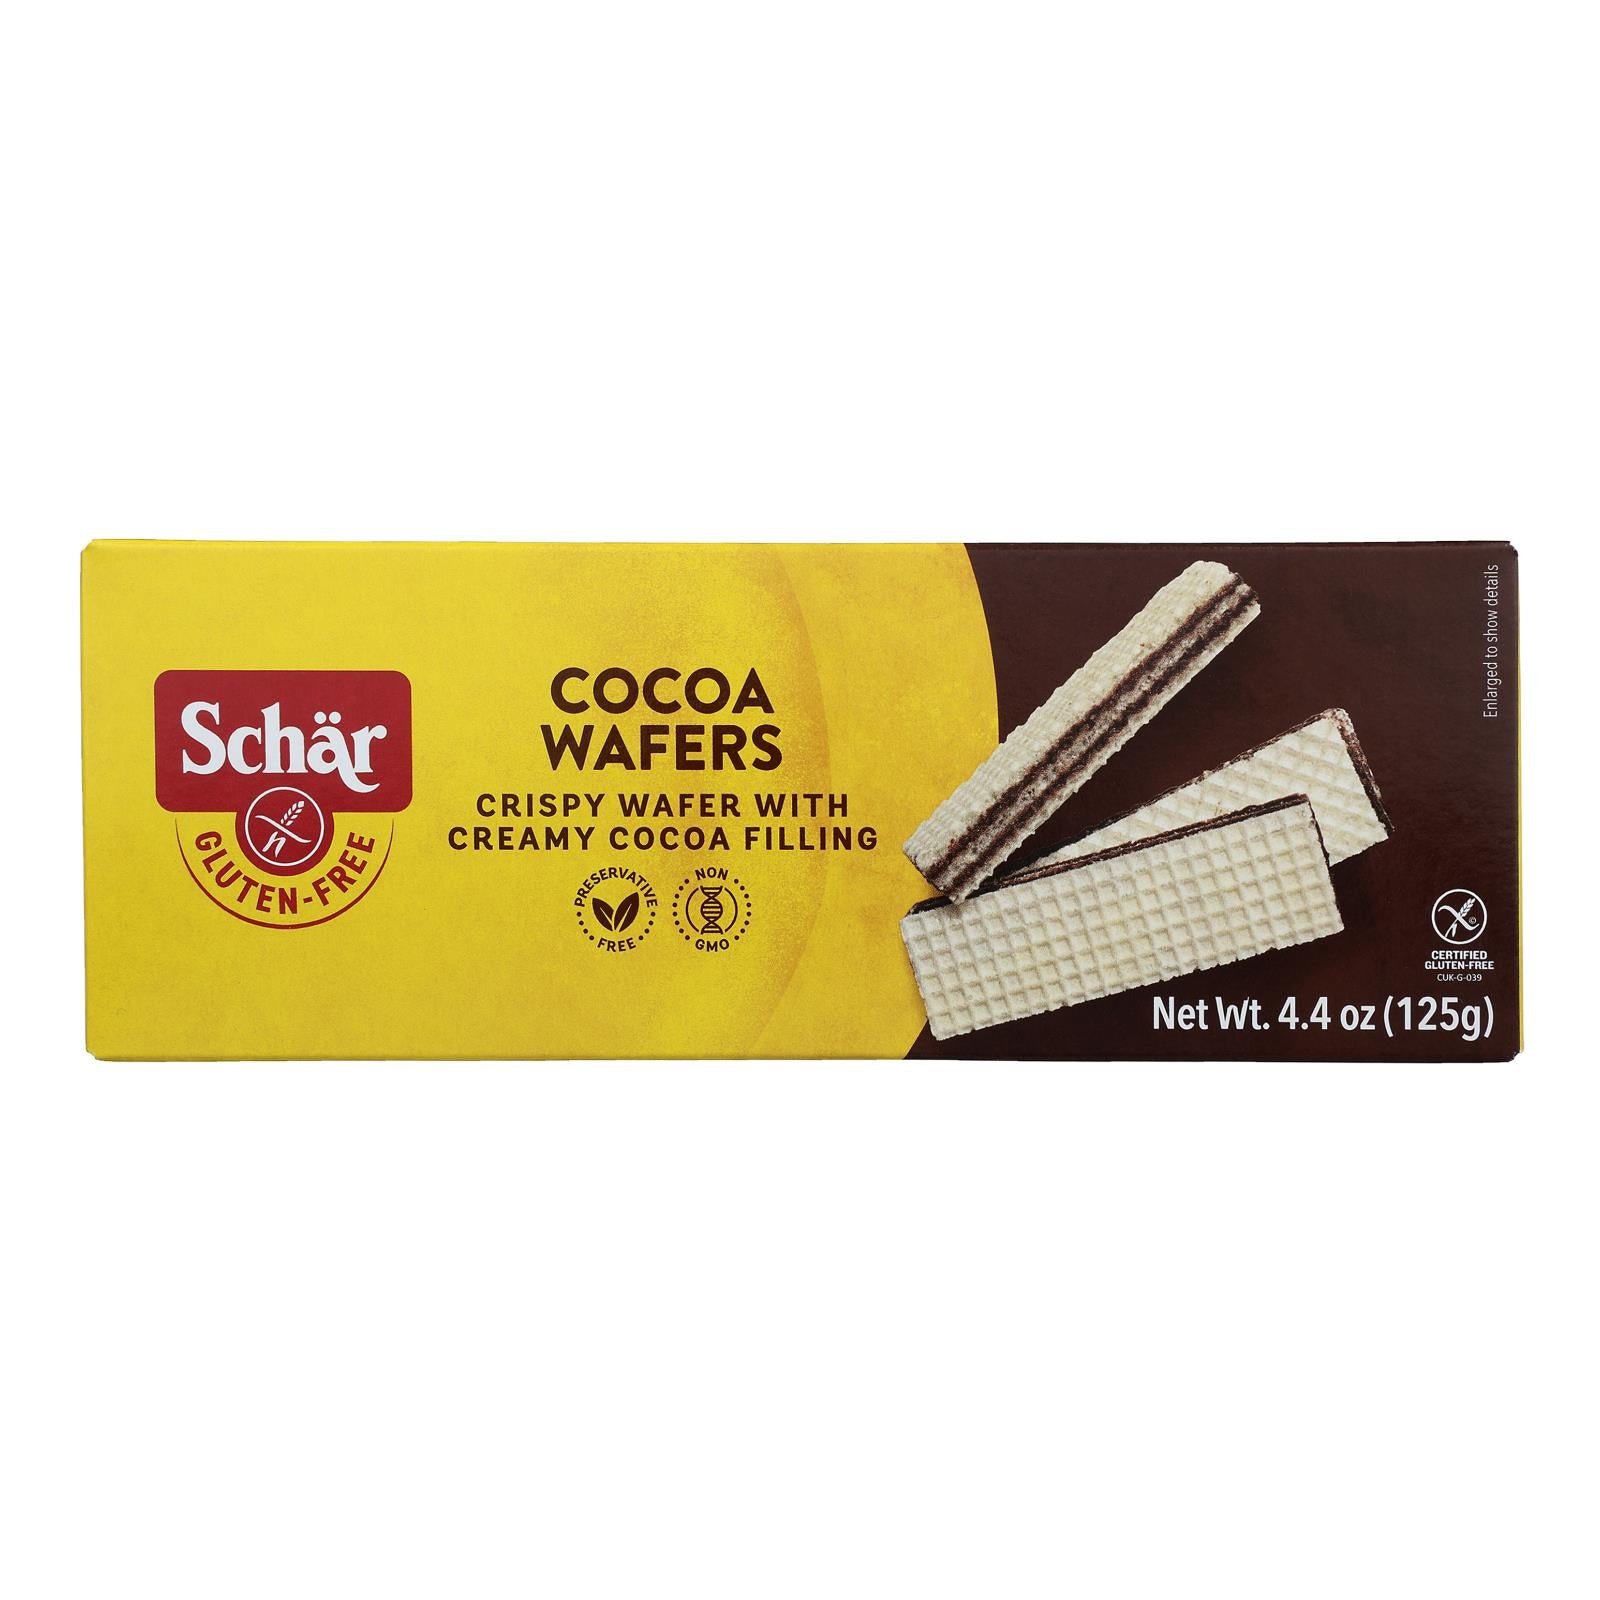 Schar Cocoa Wafers - Case of 12 - 4.4 oz.